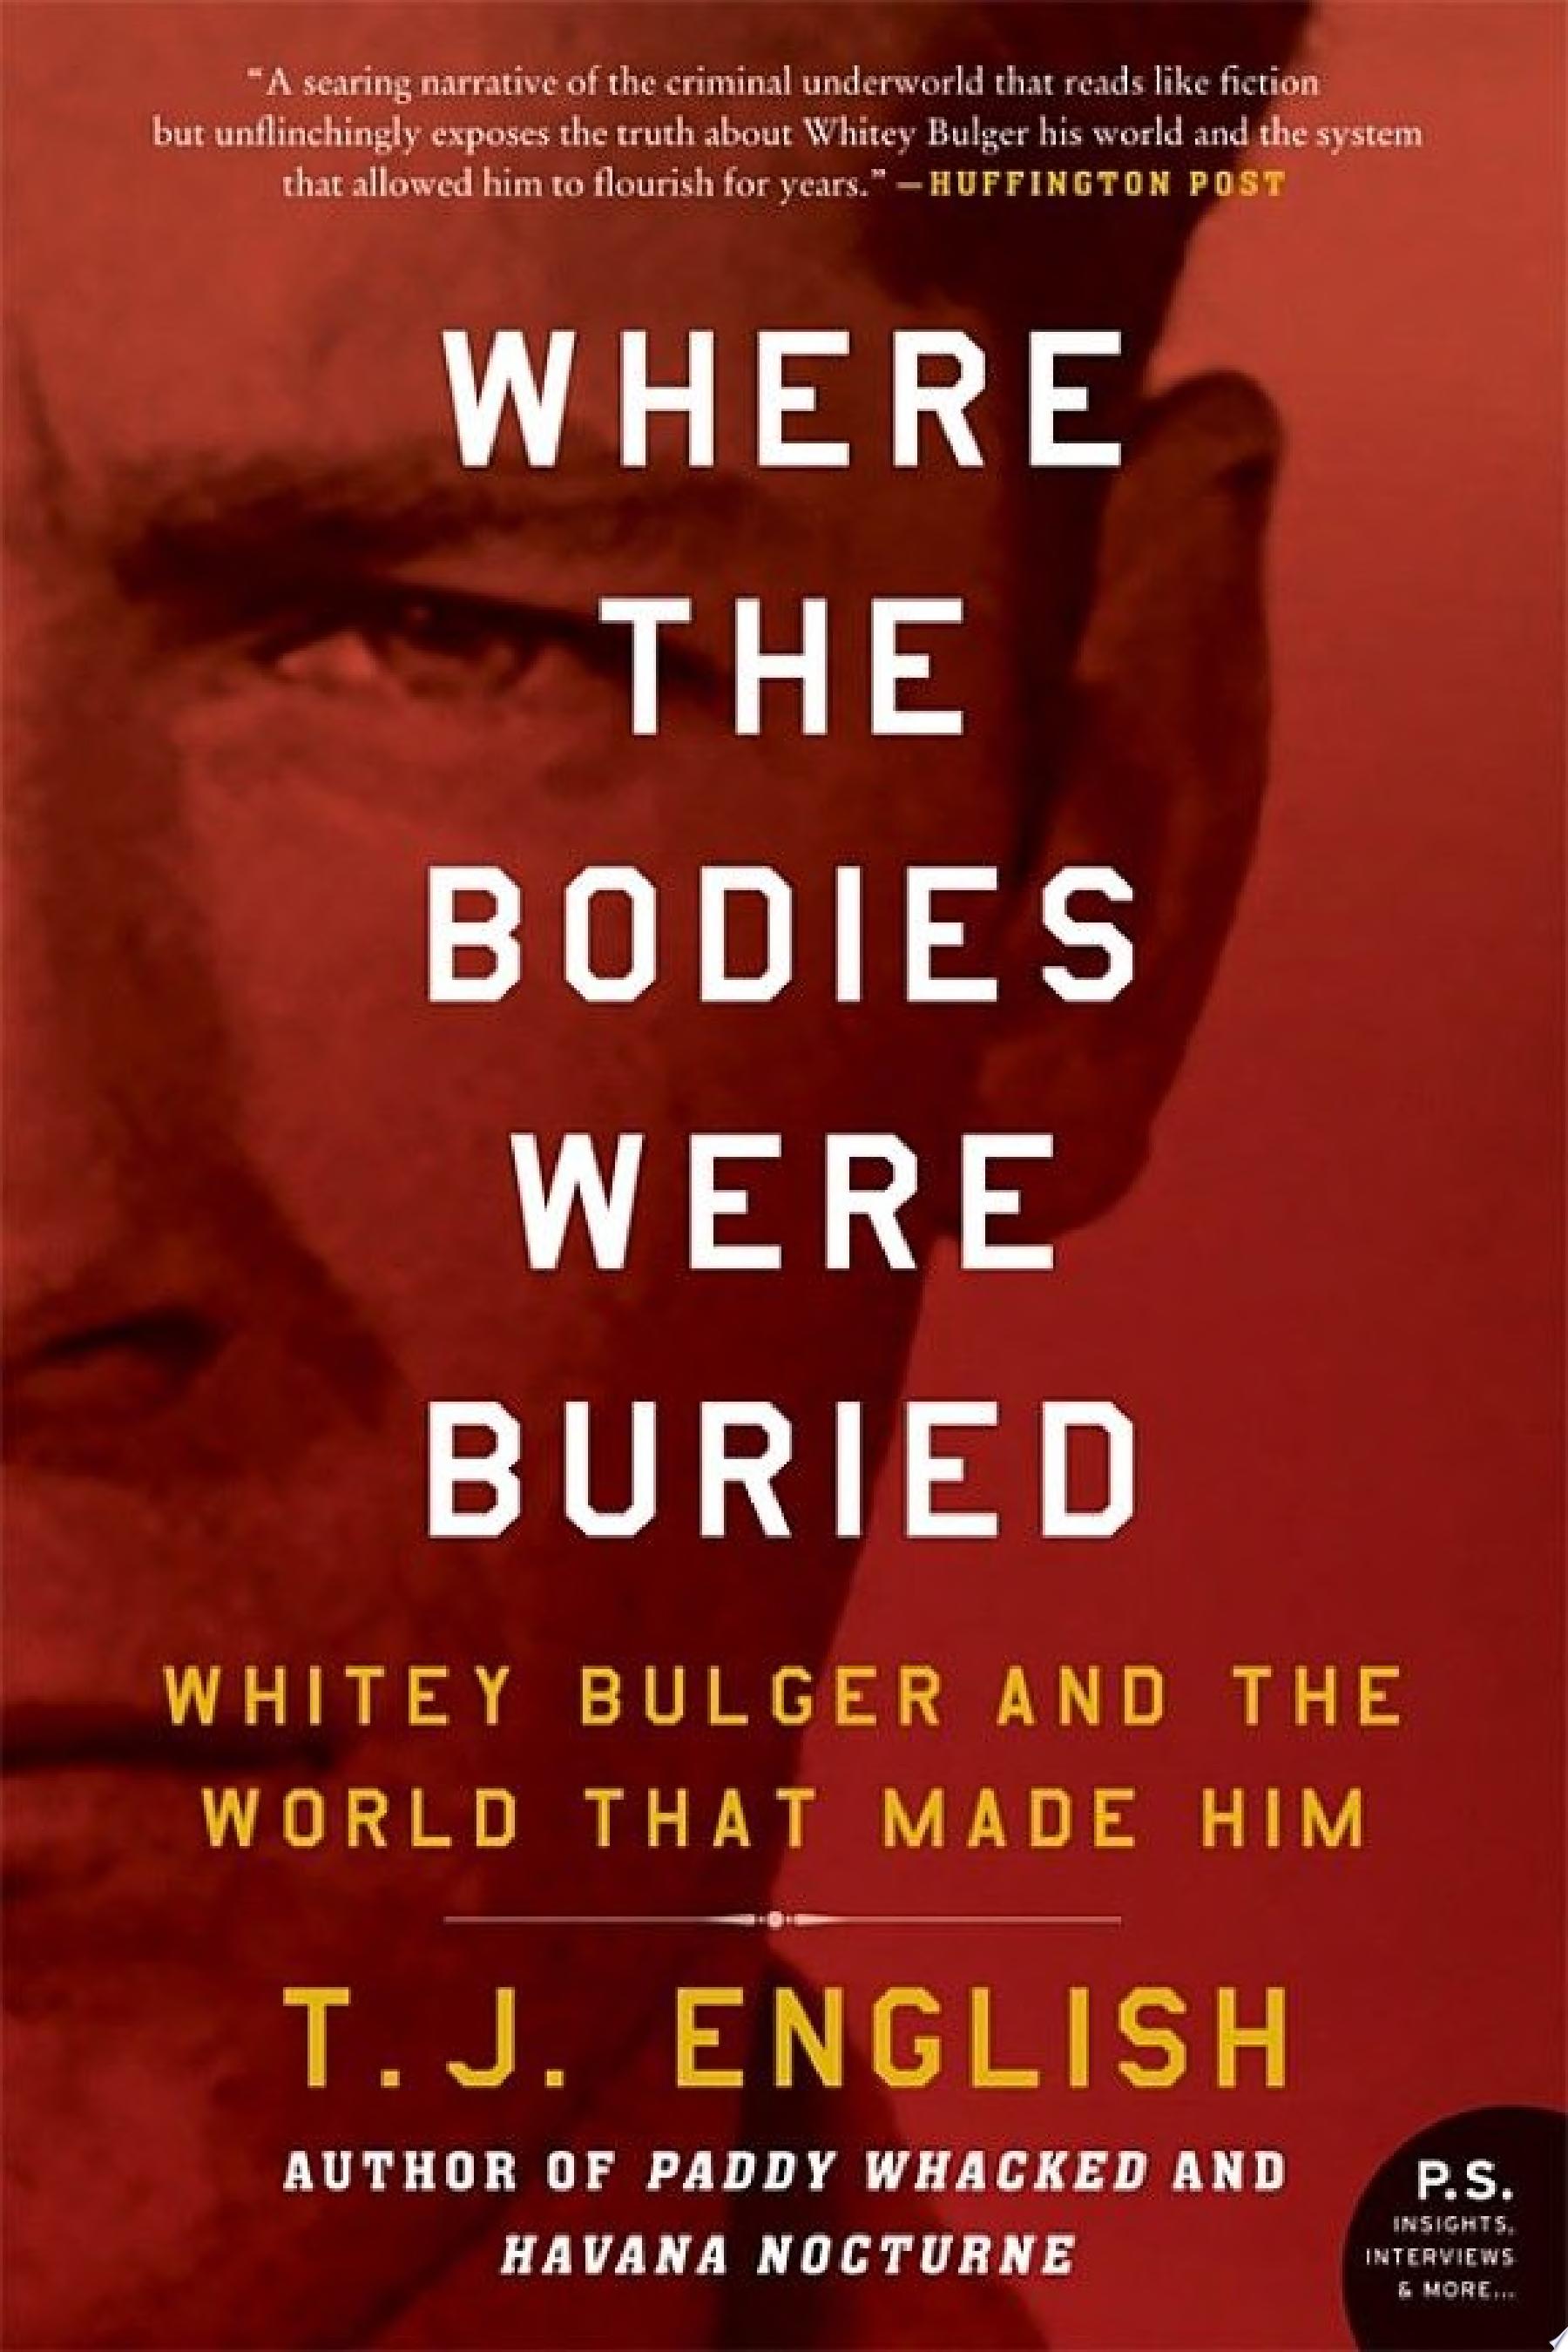 Image for "Where the Bodies Were Buried"